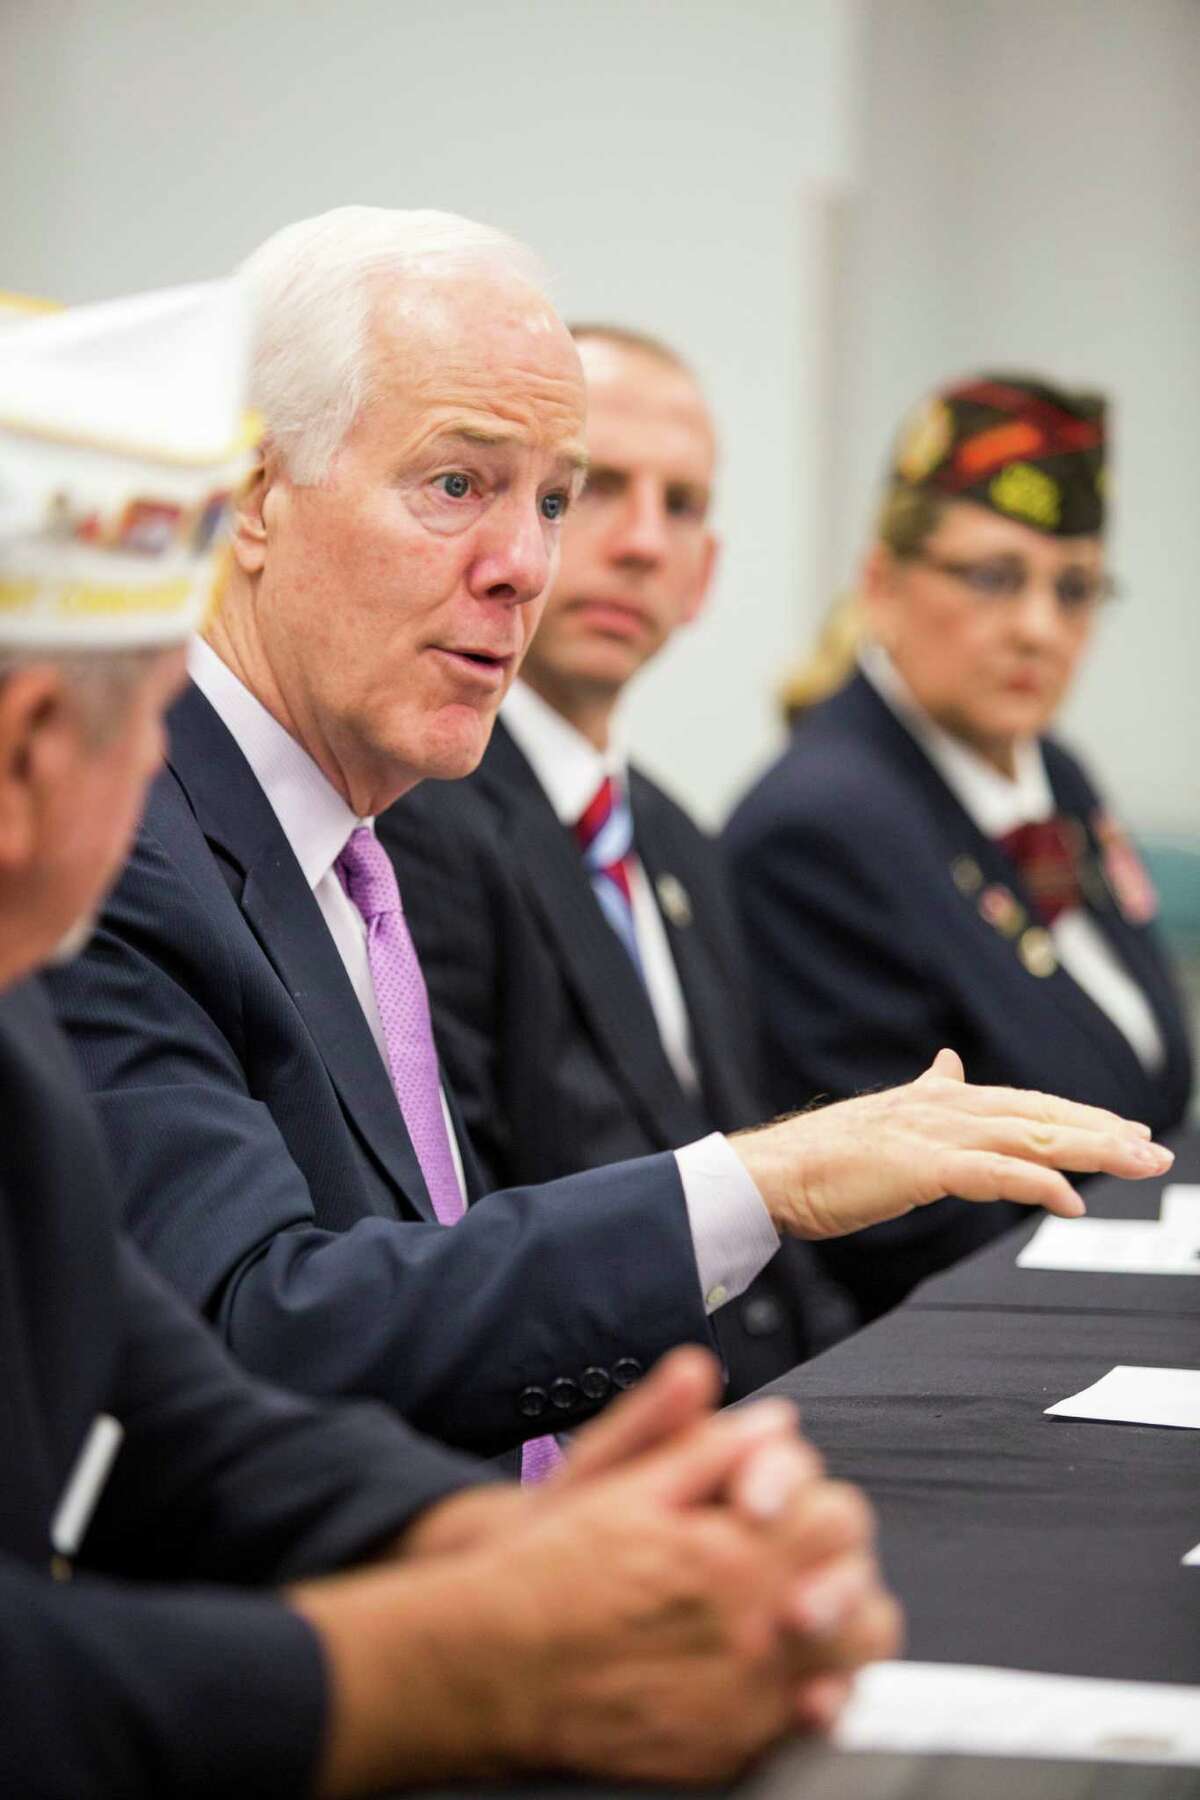 Texas senator John Cornyn speaks to a panel composed of leaders of veterans' groups, veterans and a doctor, May 29, 2014 in Houston at the Trini Mendenhall Sosa Community Center. (Eric Kayne/For the Chronicle)